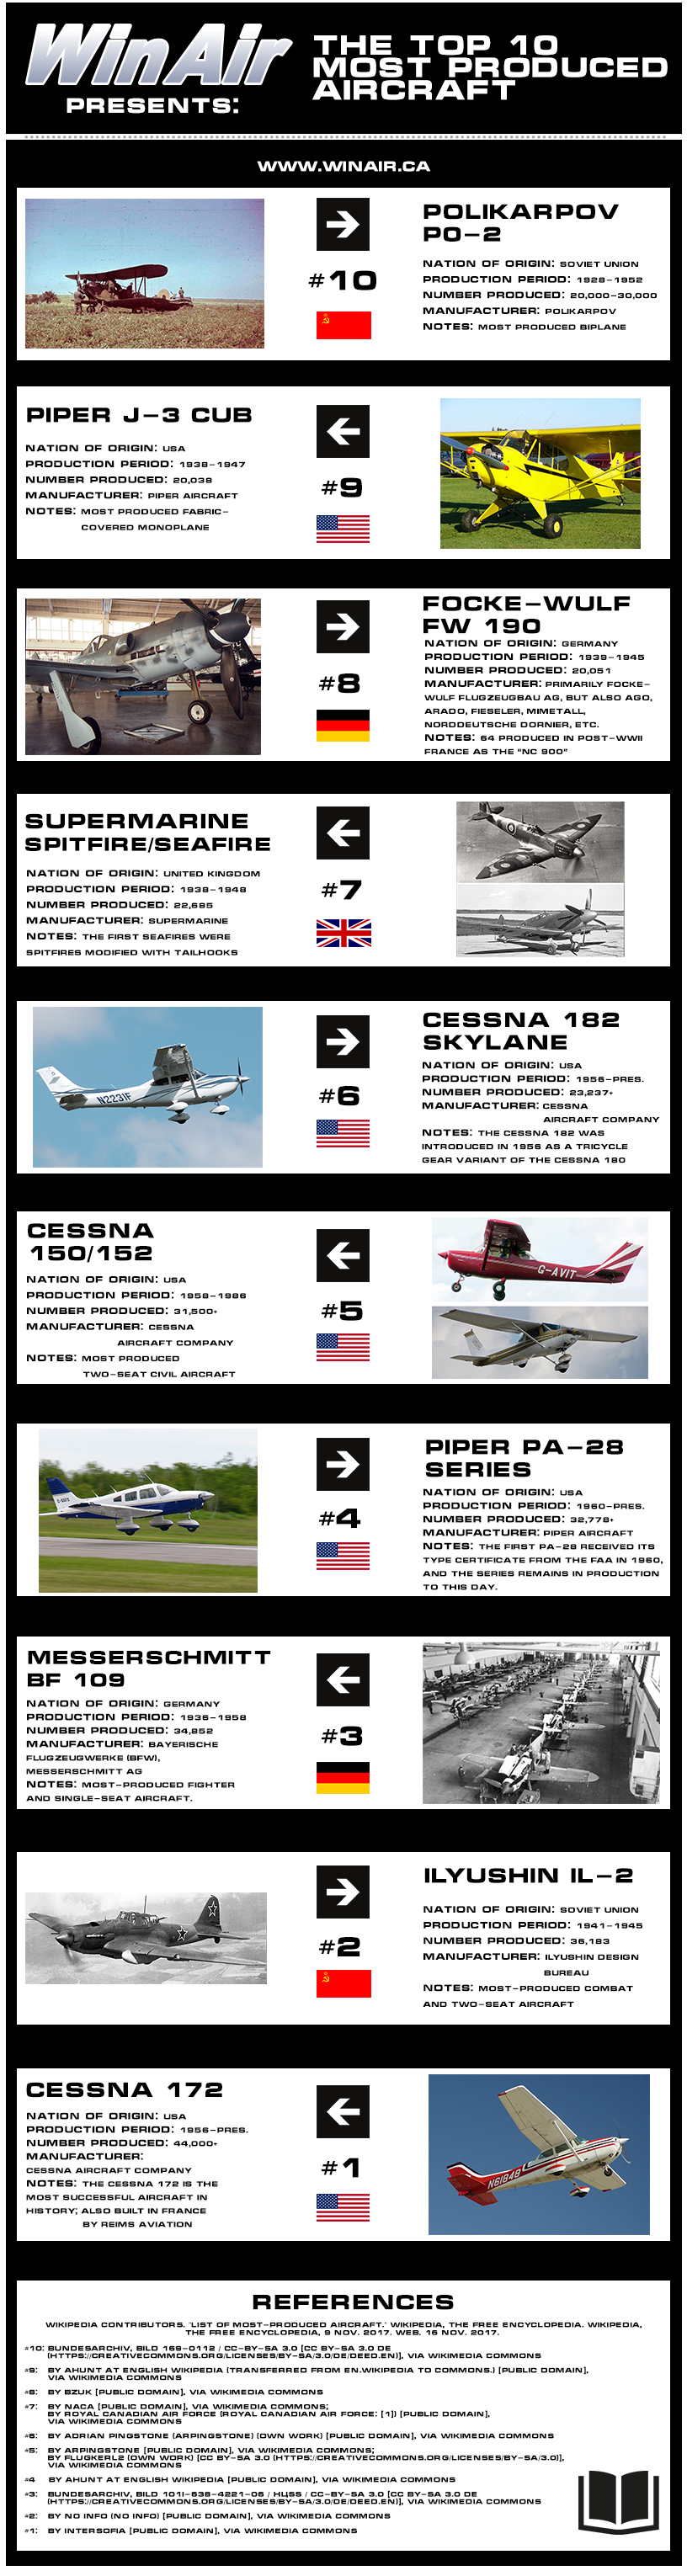 The Top 10 Most Produced Aircraft Infographic